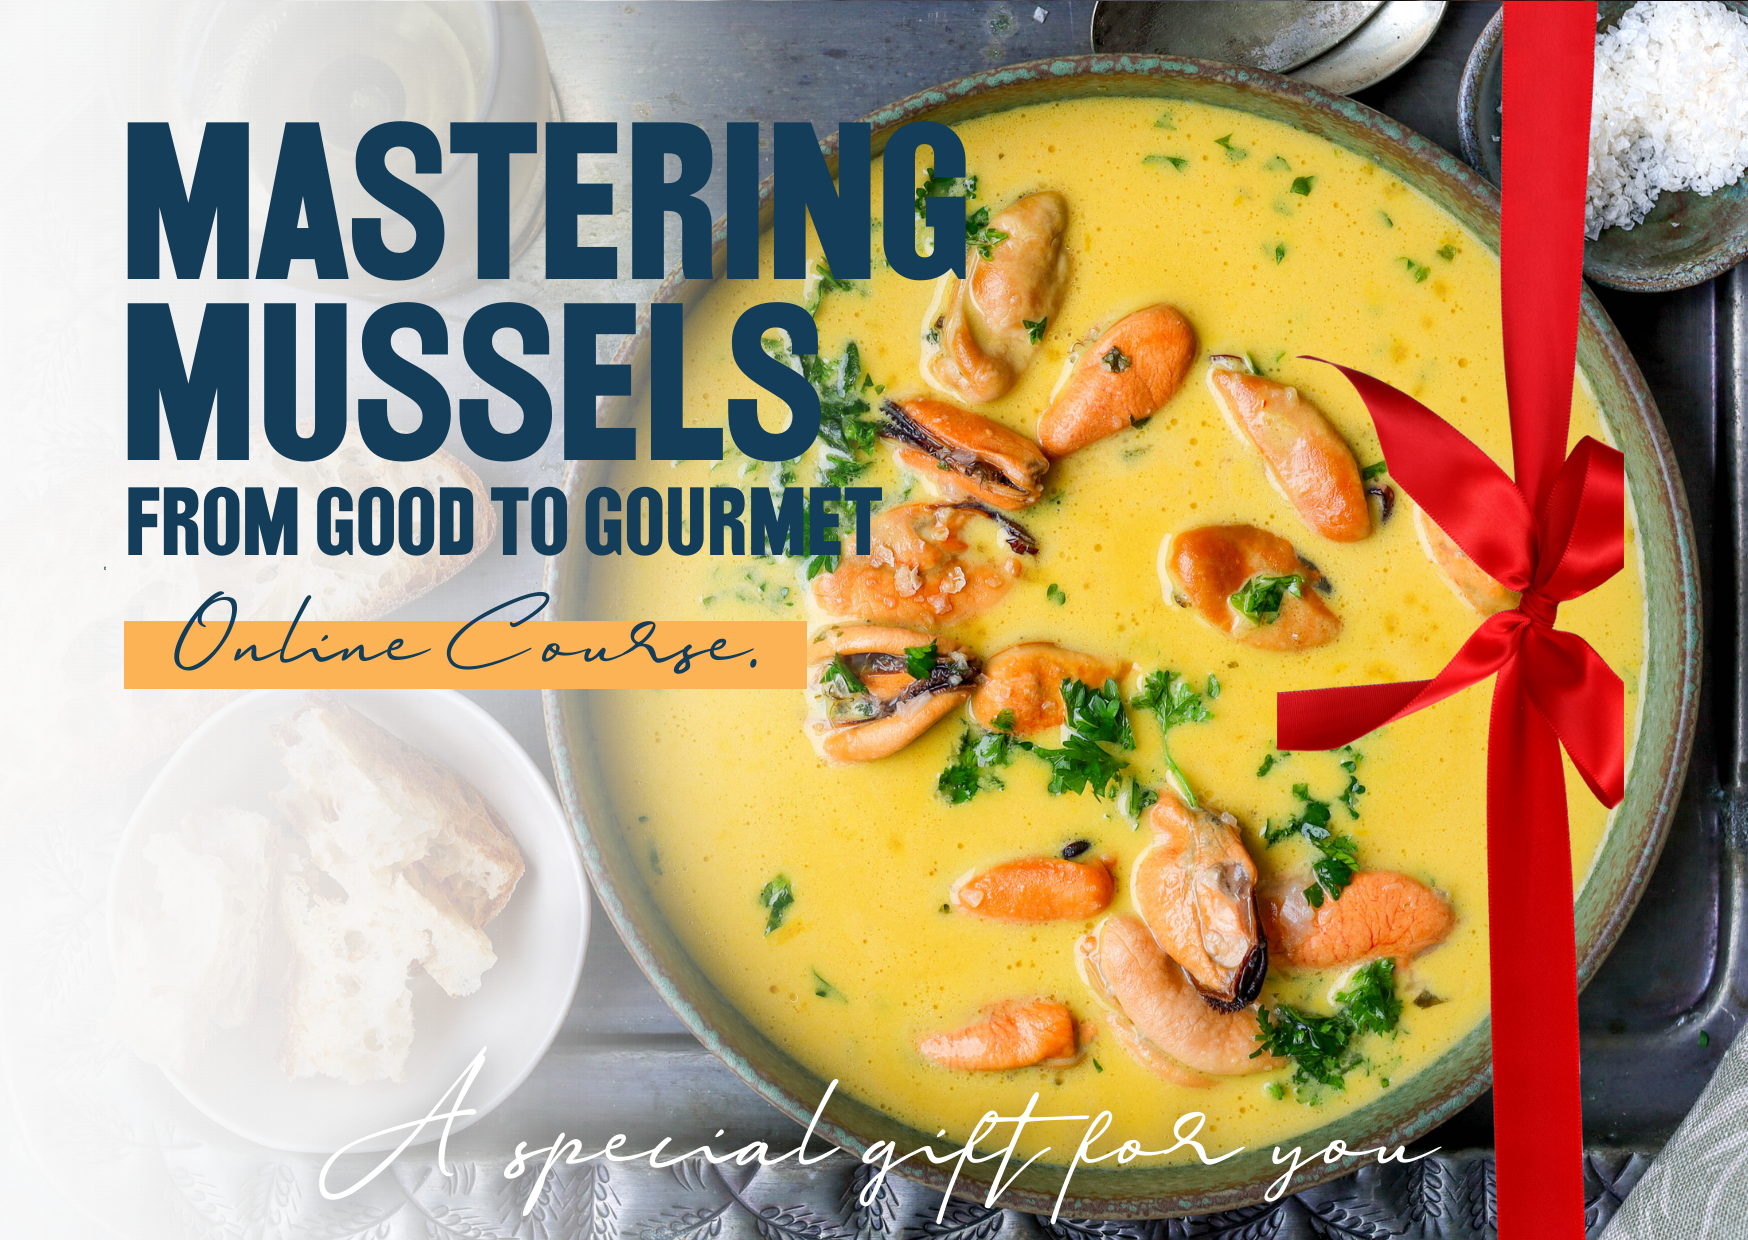 MAstering mussel online course gift card